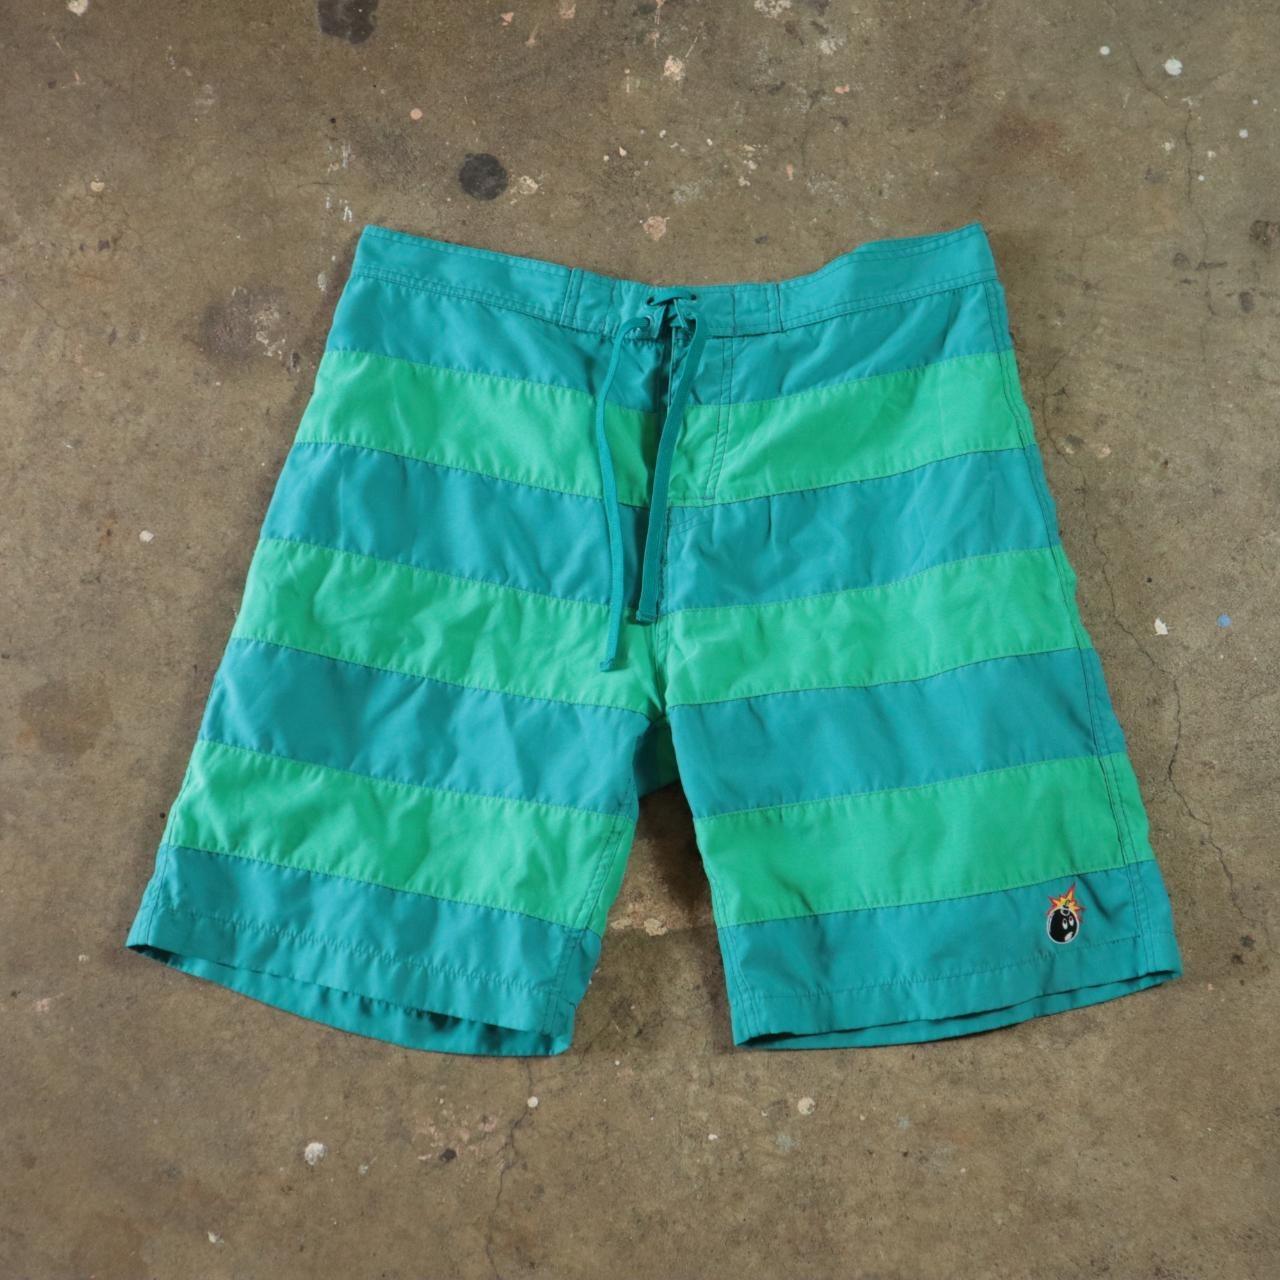 Product Image 1 - The Hundreds Beach Shorts

Striped color